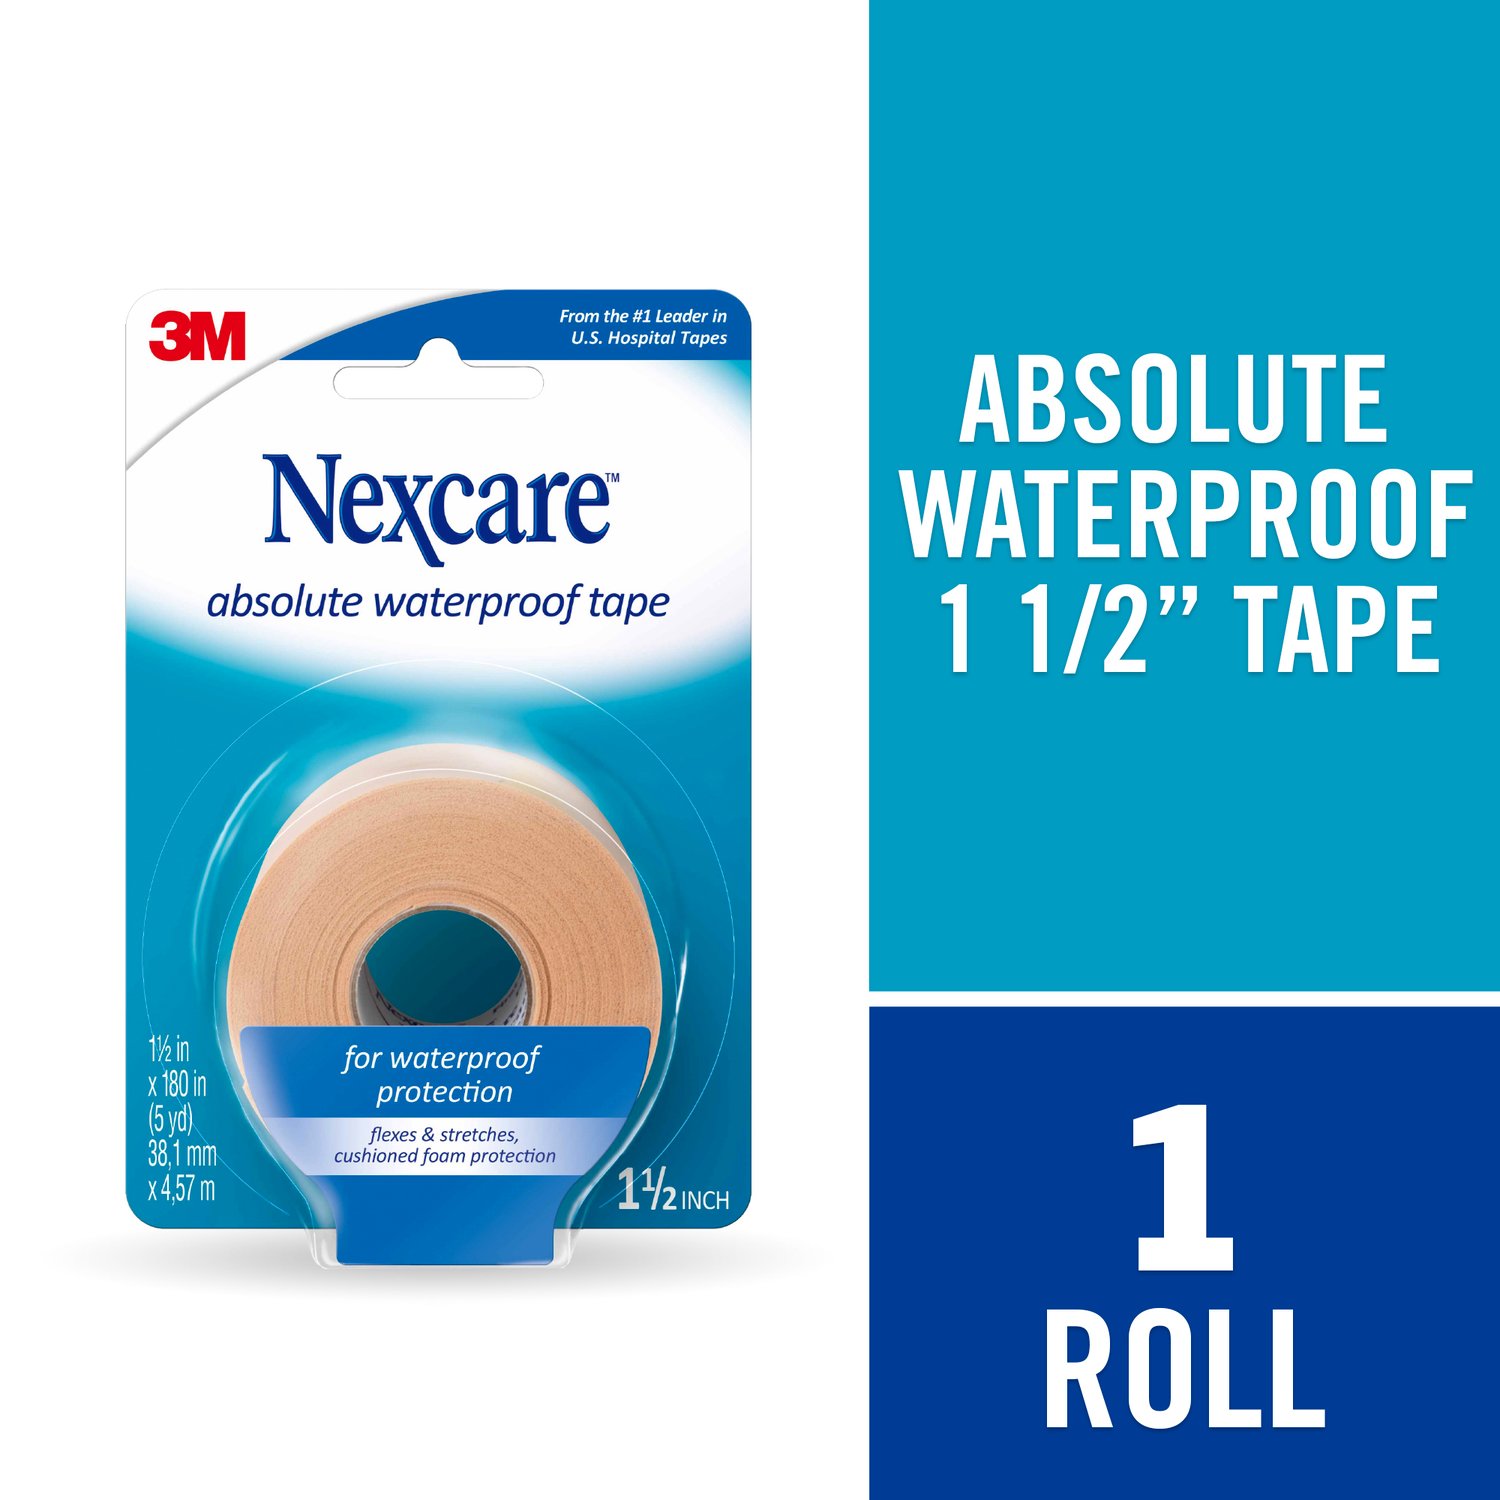 7100169257 - Nexcare Absolute Waterproof First Aid Tape 732, 1.5 in x 180 in (38,1
mm x 4.57 m)